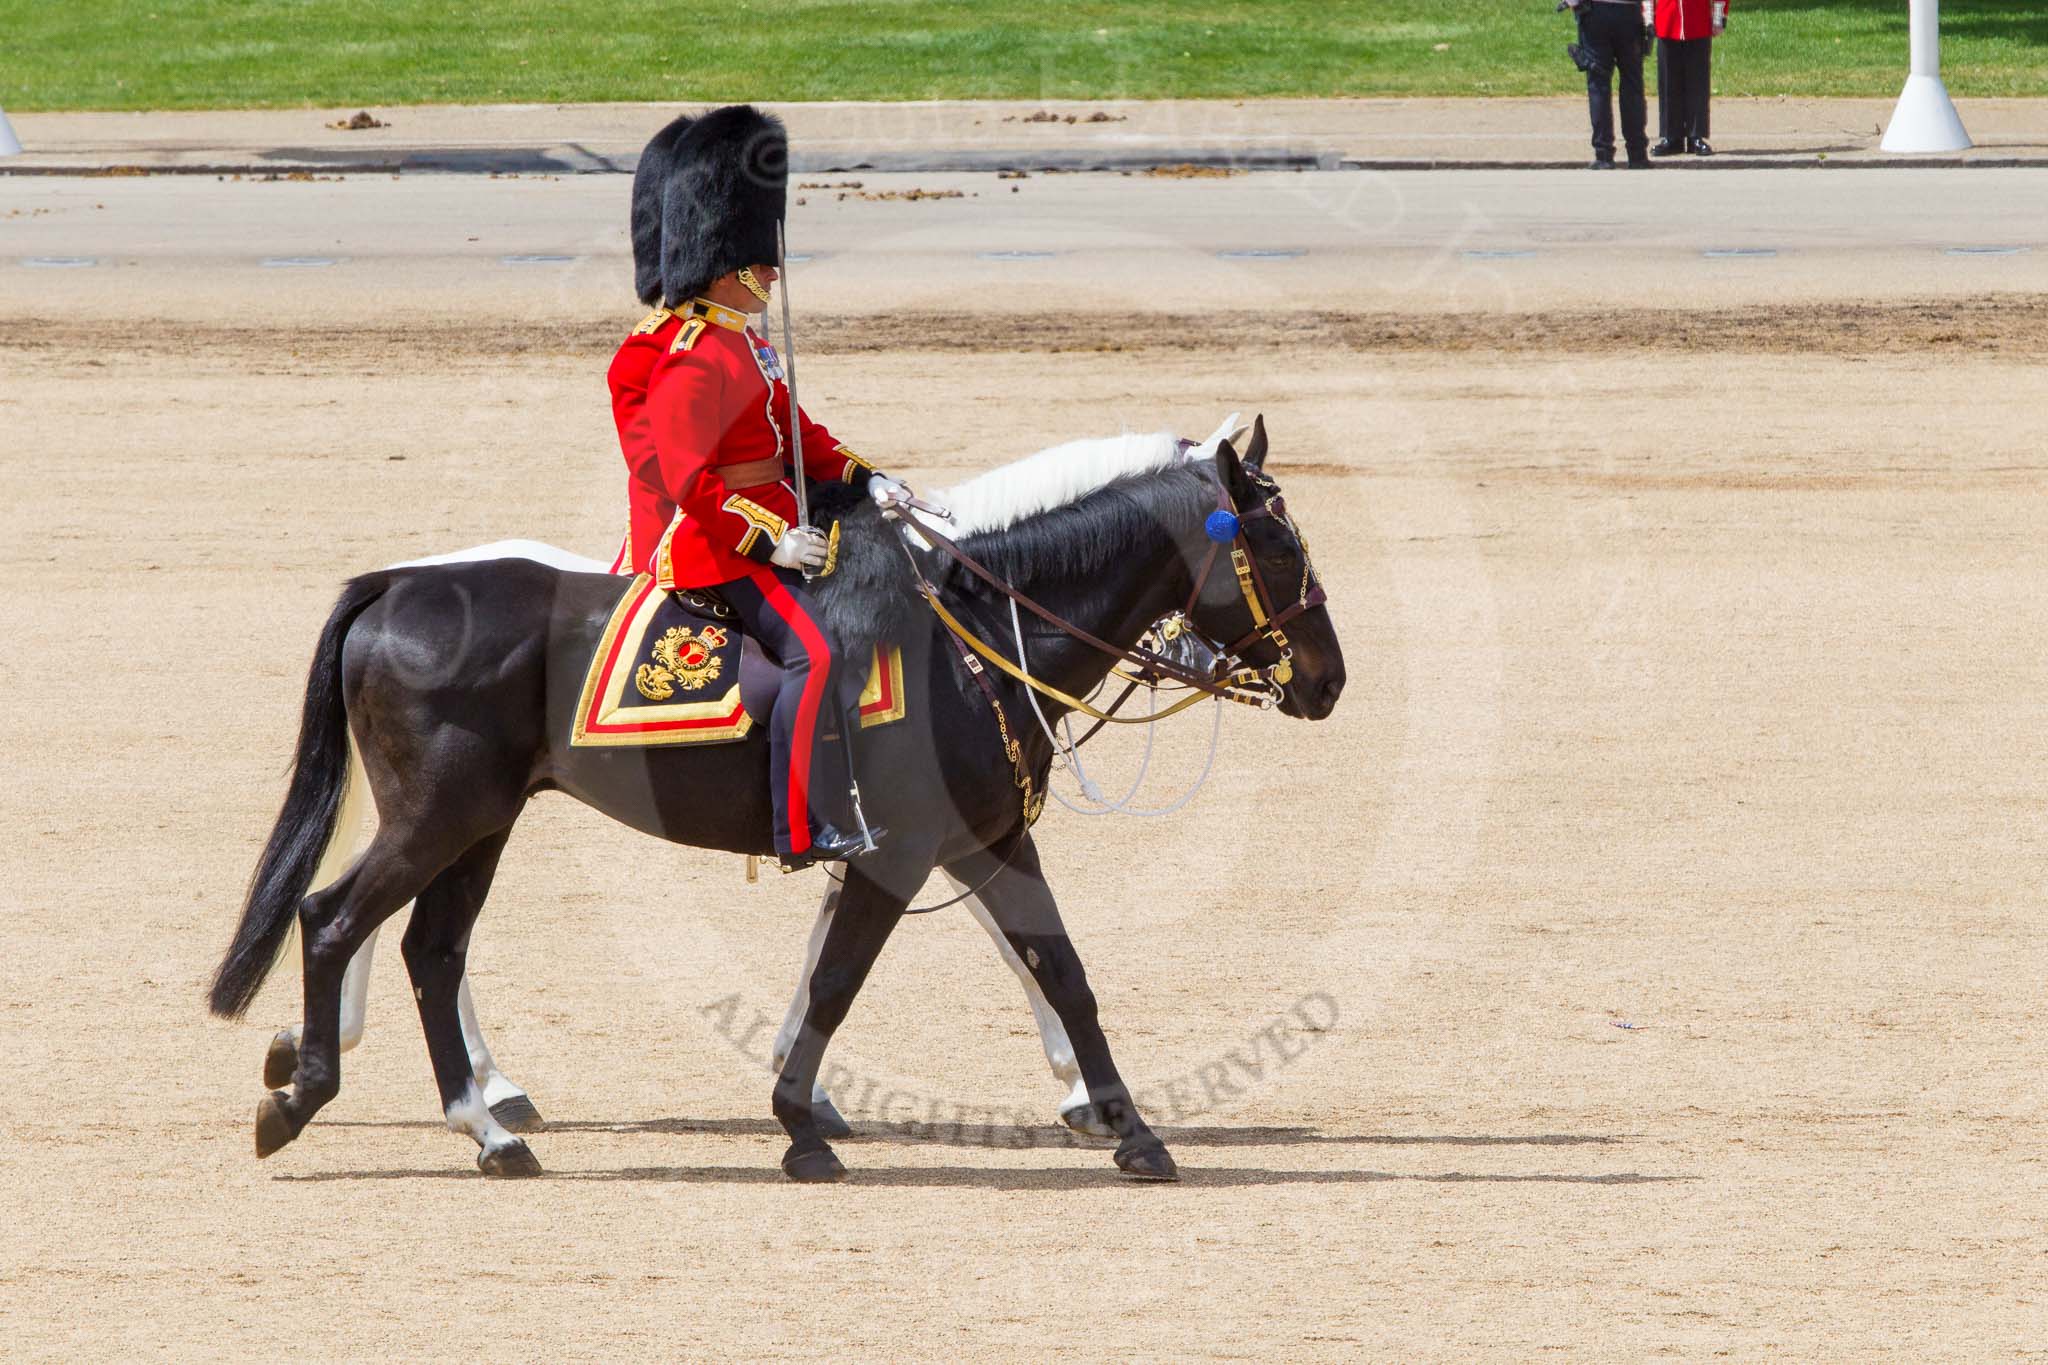 The Colonel's Review 2013.
Horse Guards Parade, Westminster,
London SW1,

United Kingdom,
on 08 June 2013 at 12:10, image #859